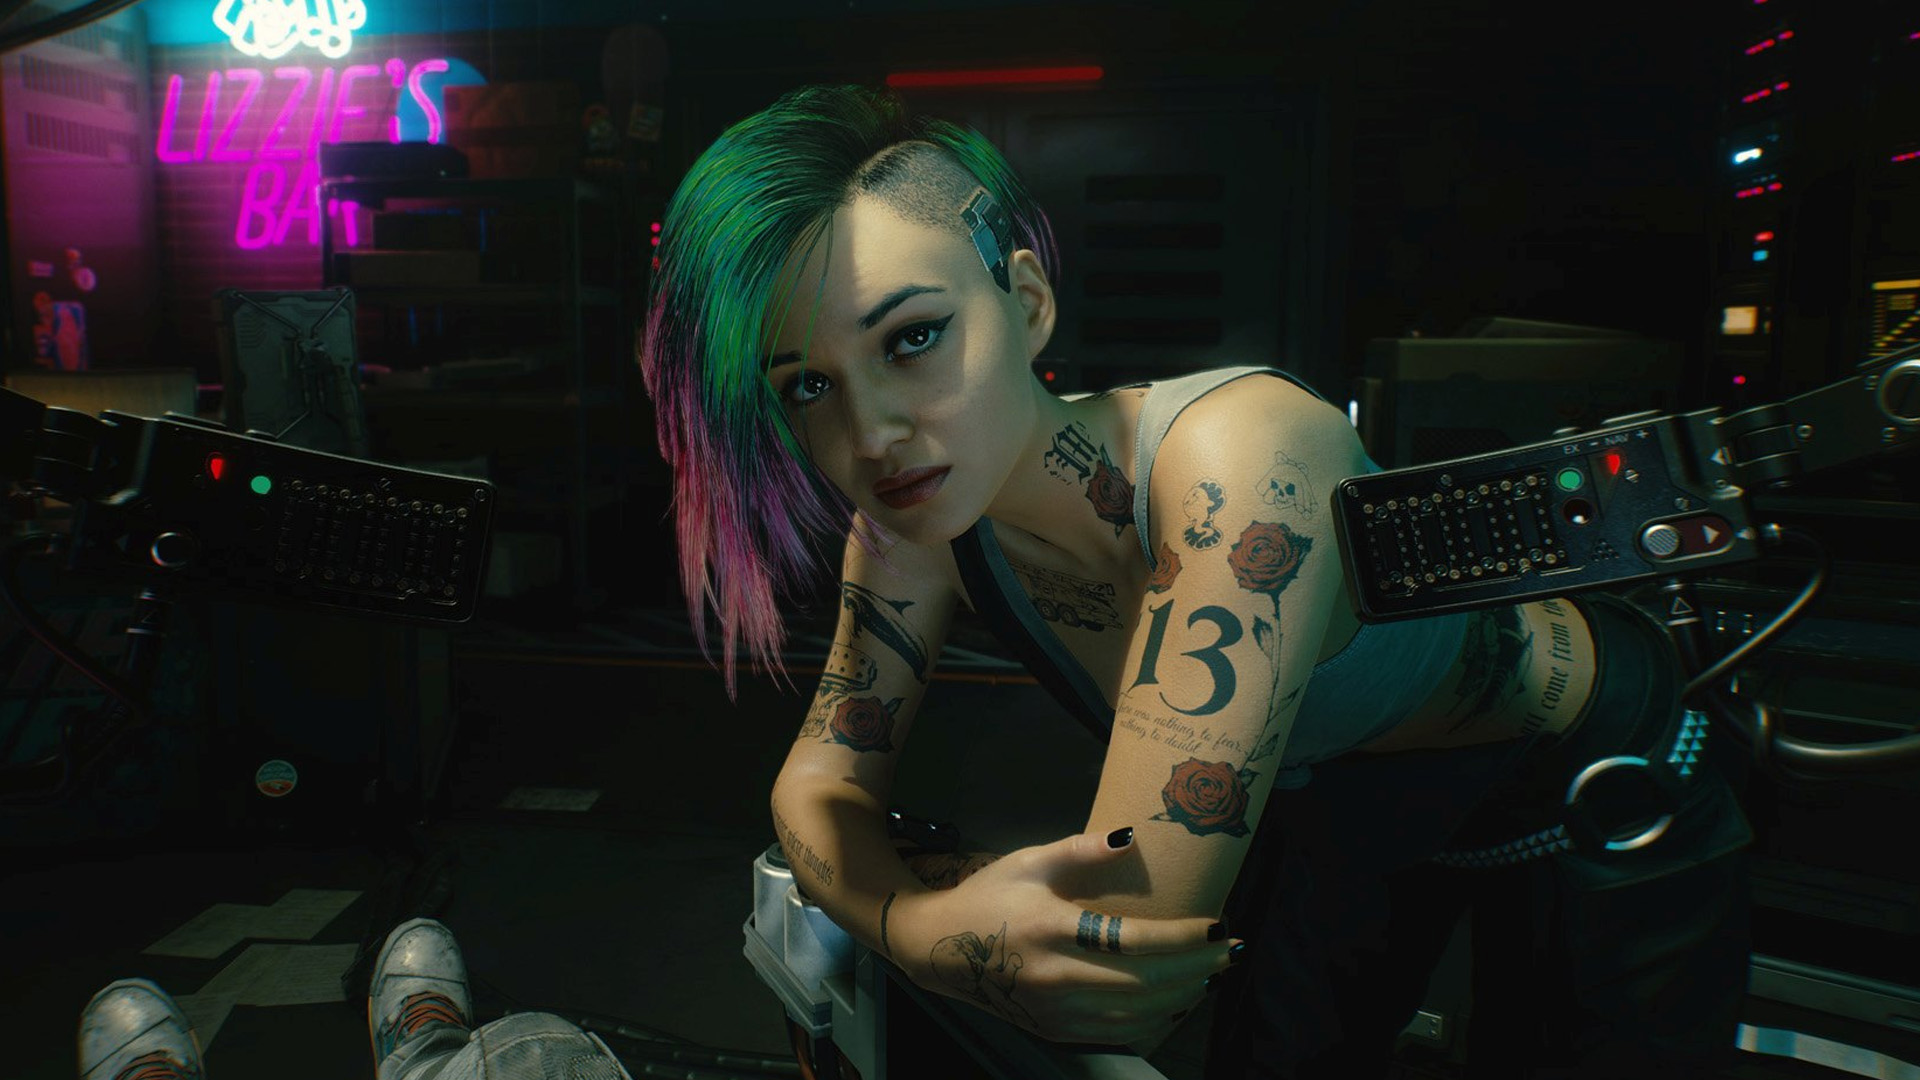 An image of the character Judy Alvarez from Cyberpunk 2077.